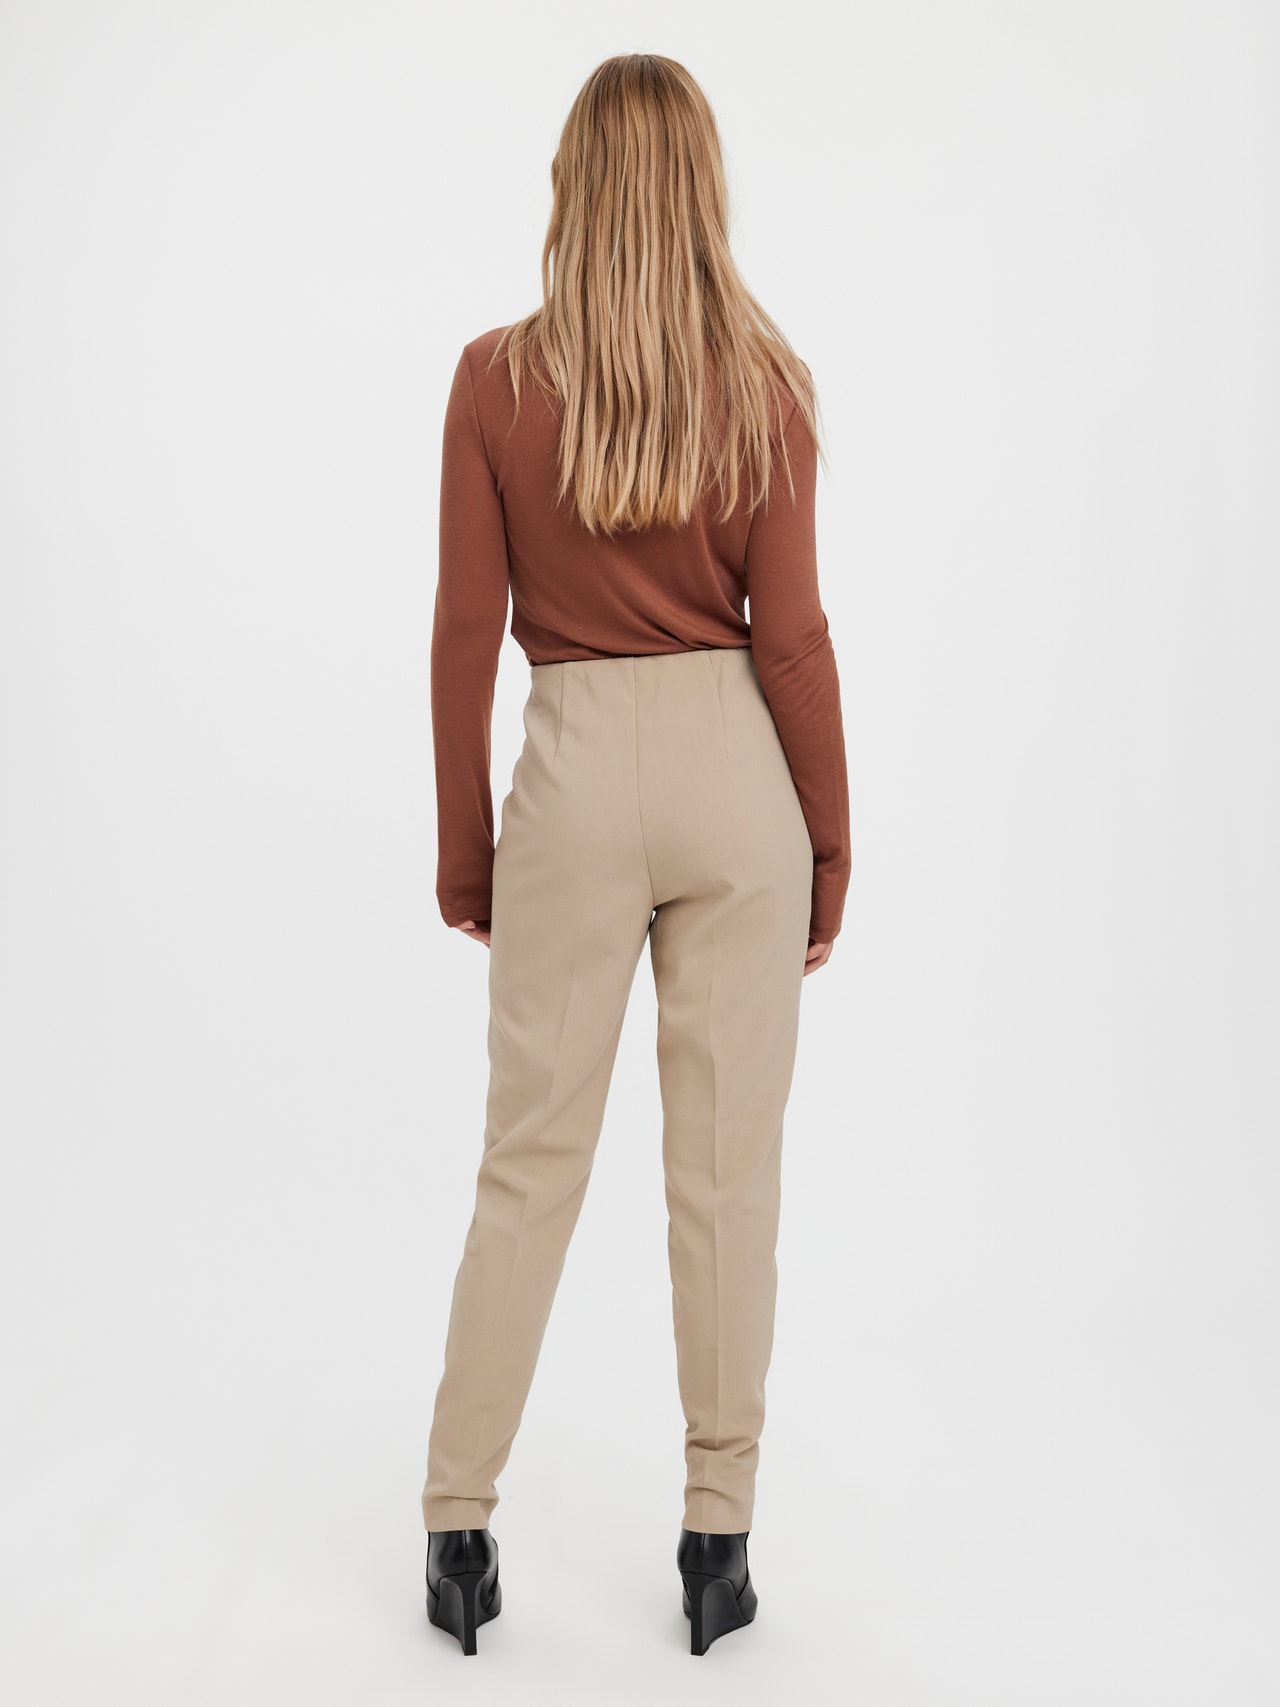 High Vero rise Moda® VMSANDY Trousers 40% discount! | with